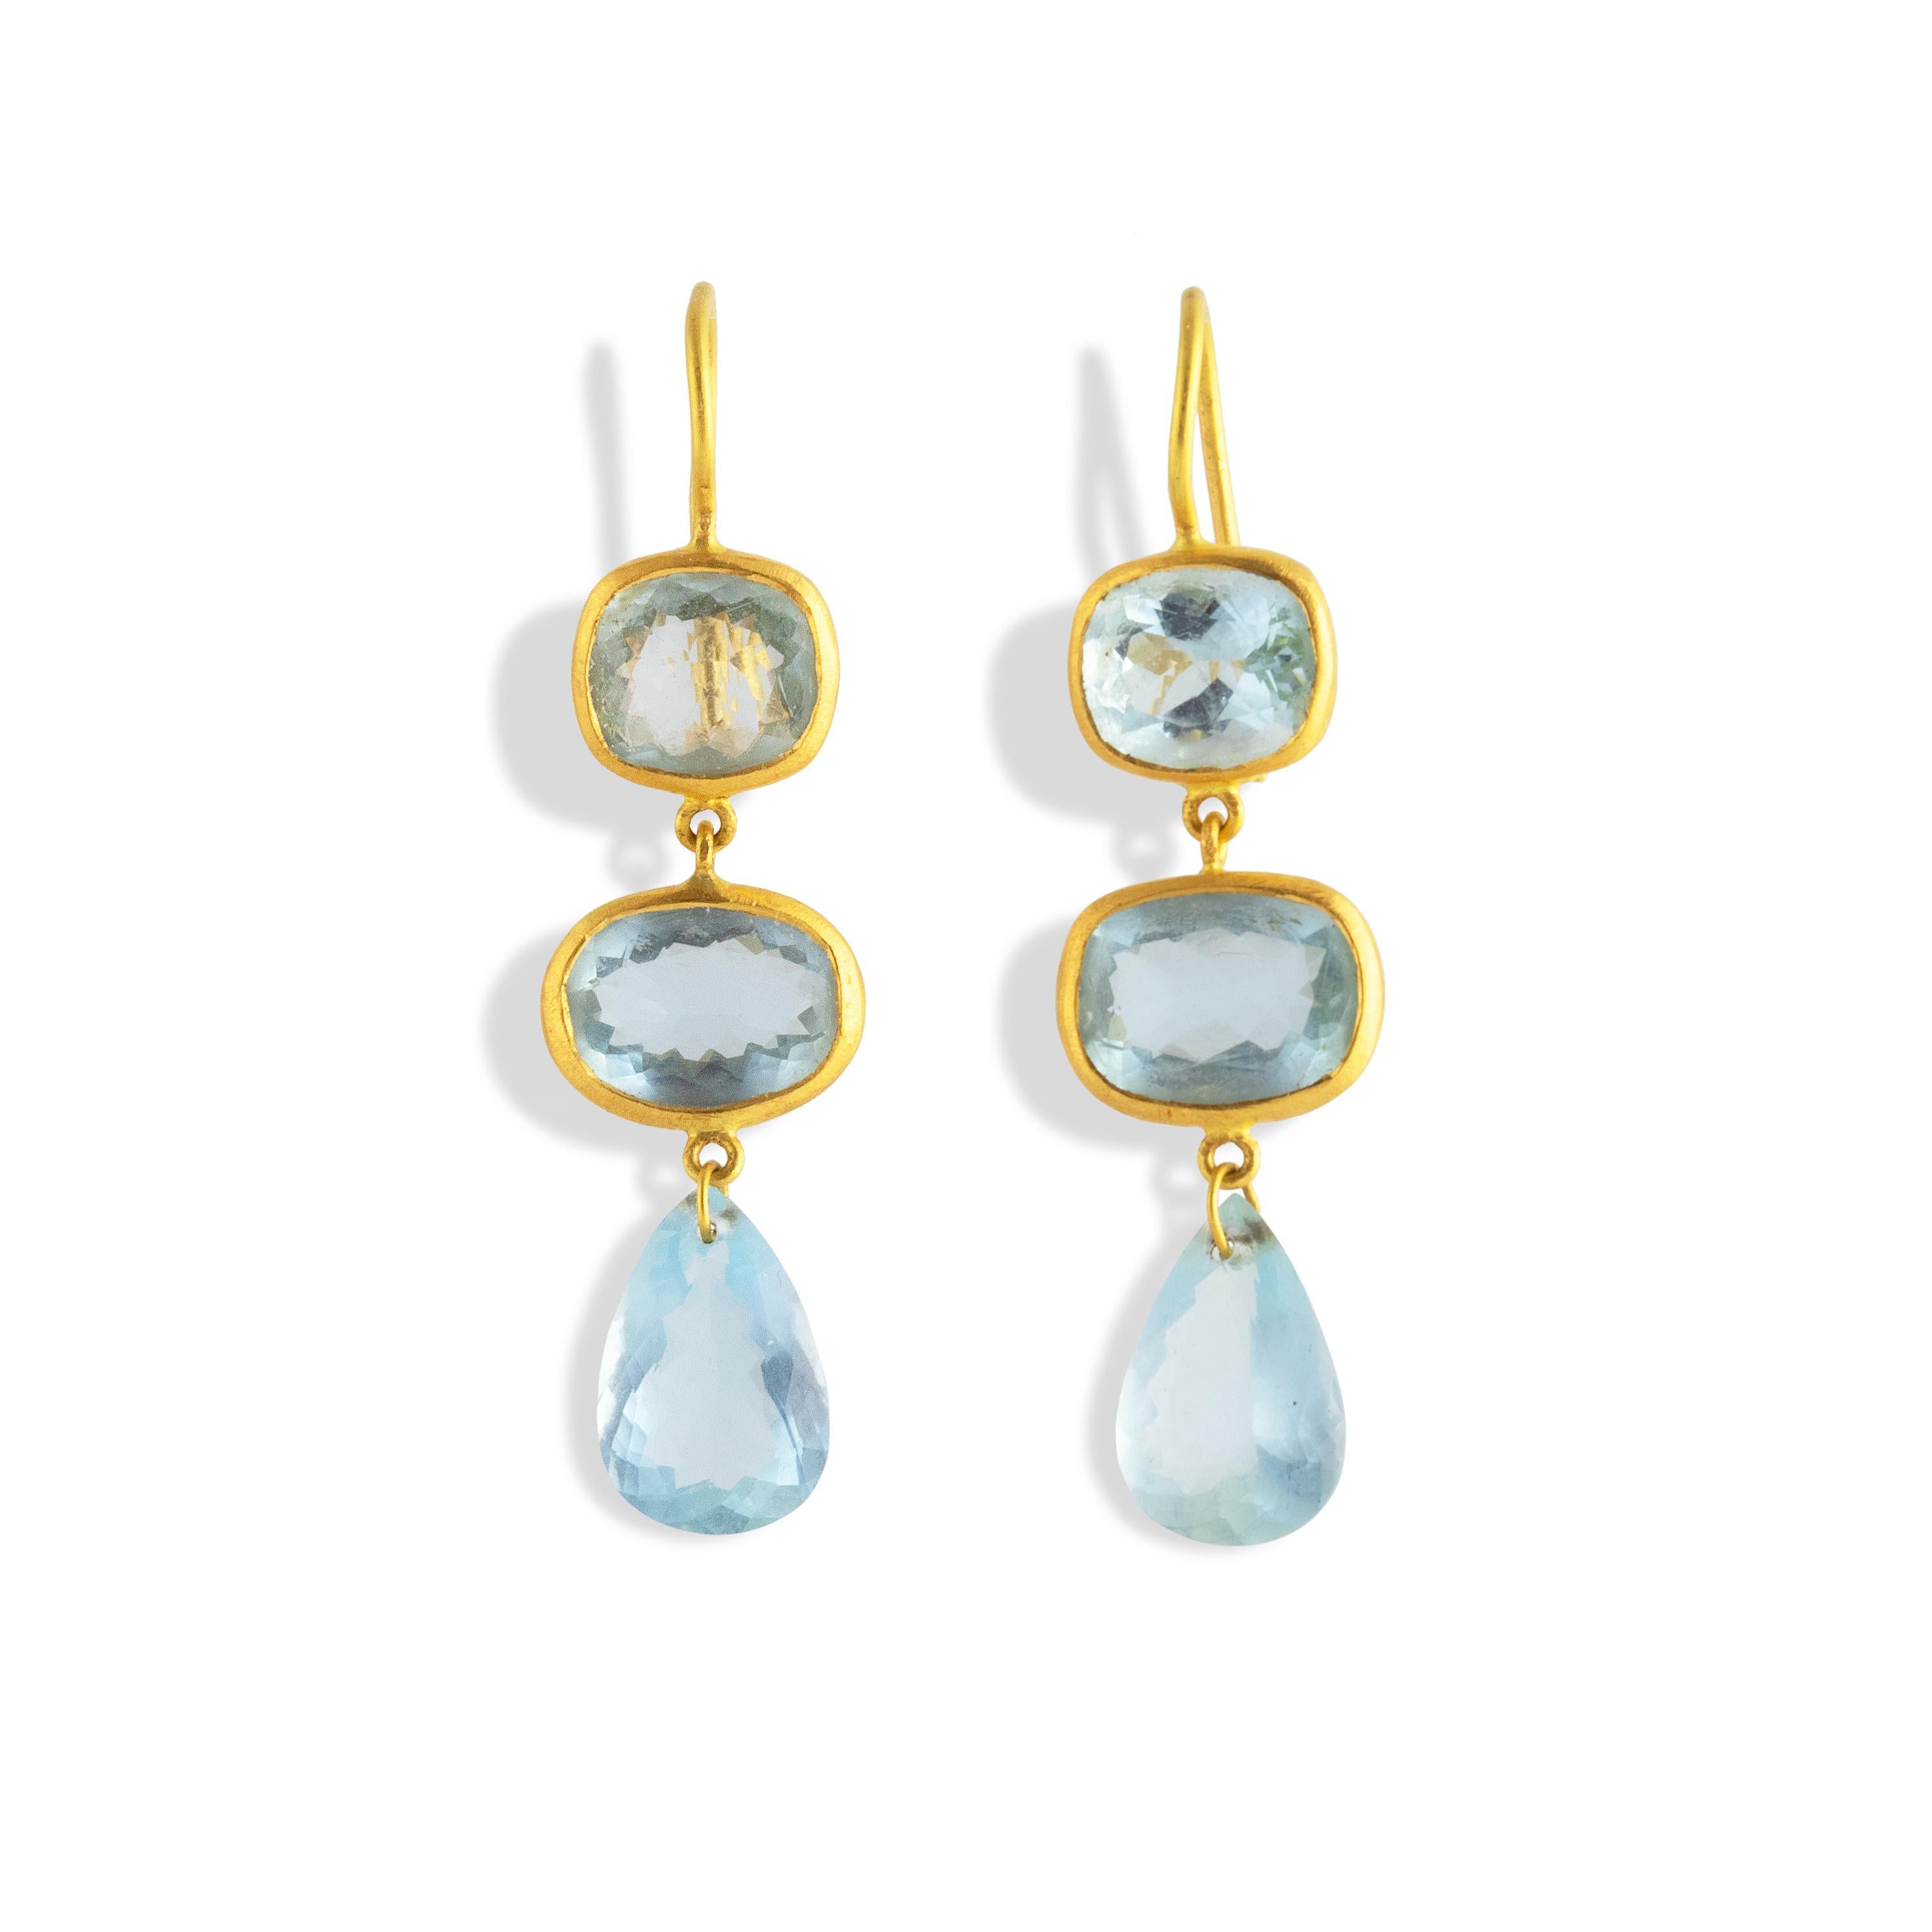 Rich blue Aquamarine 3 stone Earrings set in 22k.  Featuring cushion, oval, emerald and pear shaped gemstones, all in the shame shade of blue.   The richness of the gold highlights the saturated blue of these aquamarines.

According to legend,